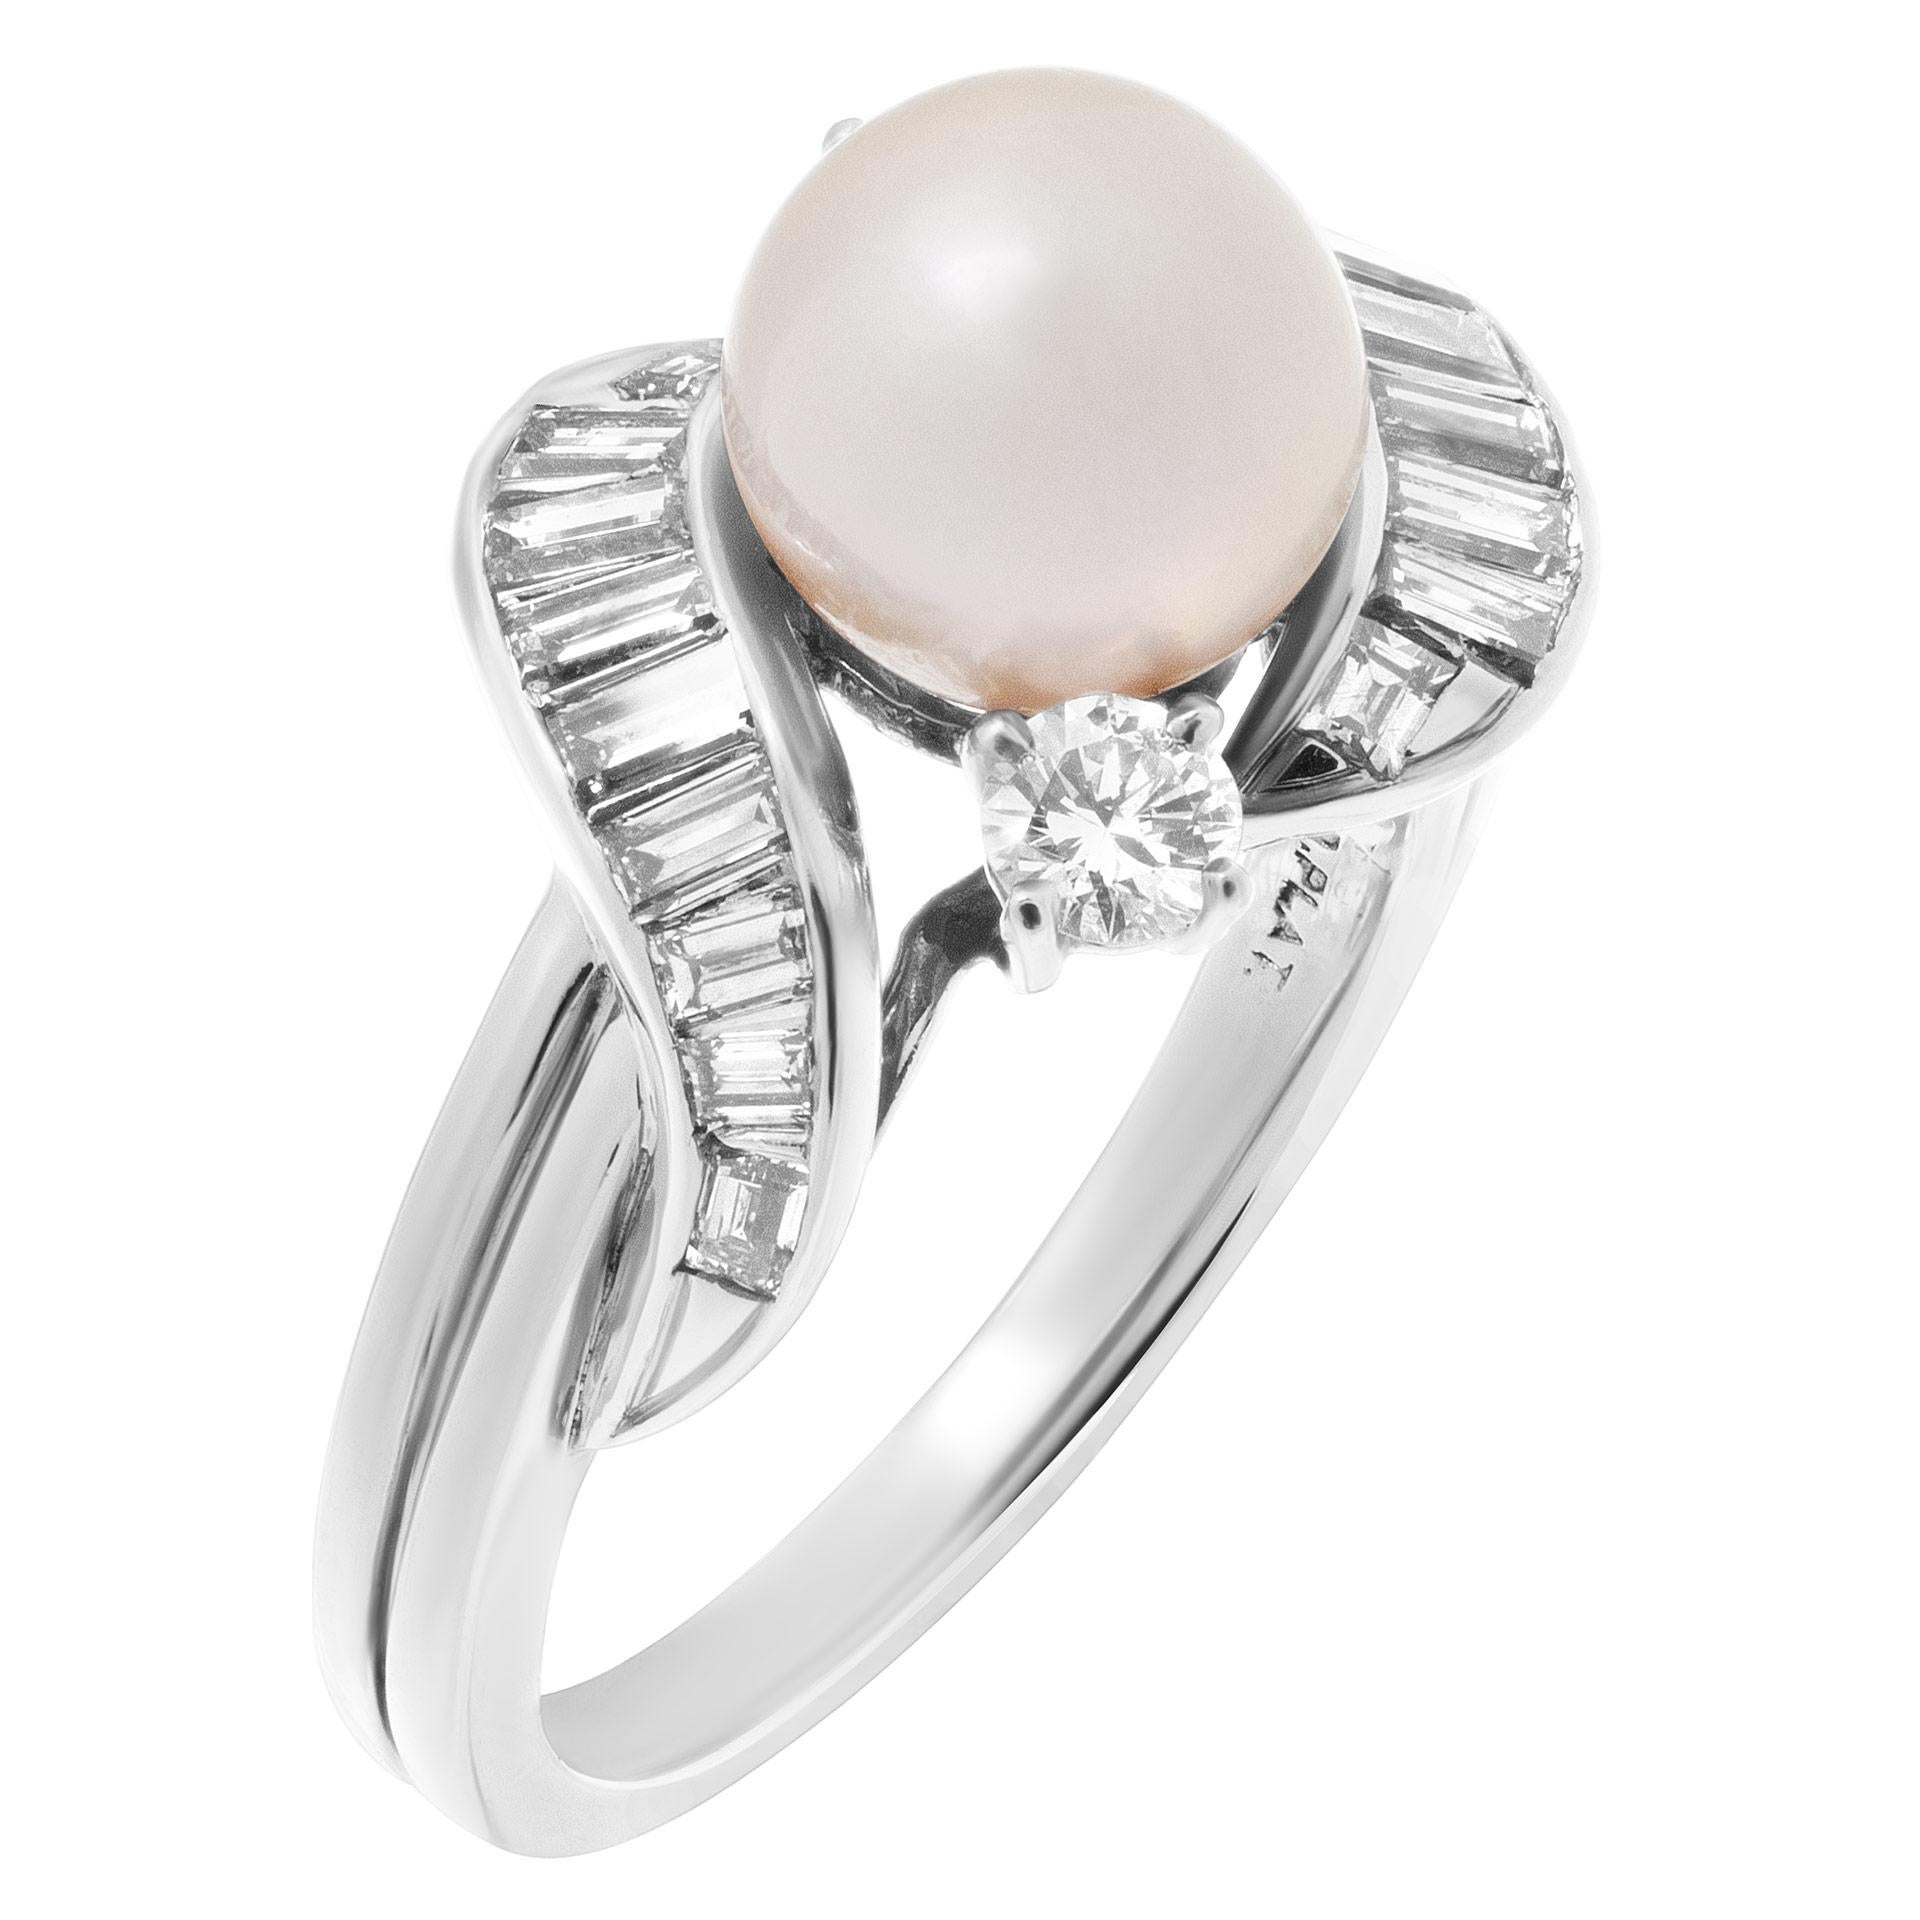 Gorgeous 7 mm pearl ring in platinum with round and baguette diamond accents approximately 0.50 carat G-H color, VS clarity. Size: 5.  This Pearl/diamond ring is currently size 5 and some items can be sized up or down, please ask! It weighs 4.8